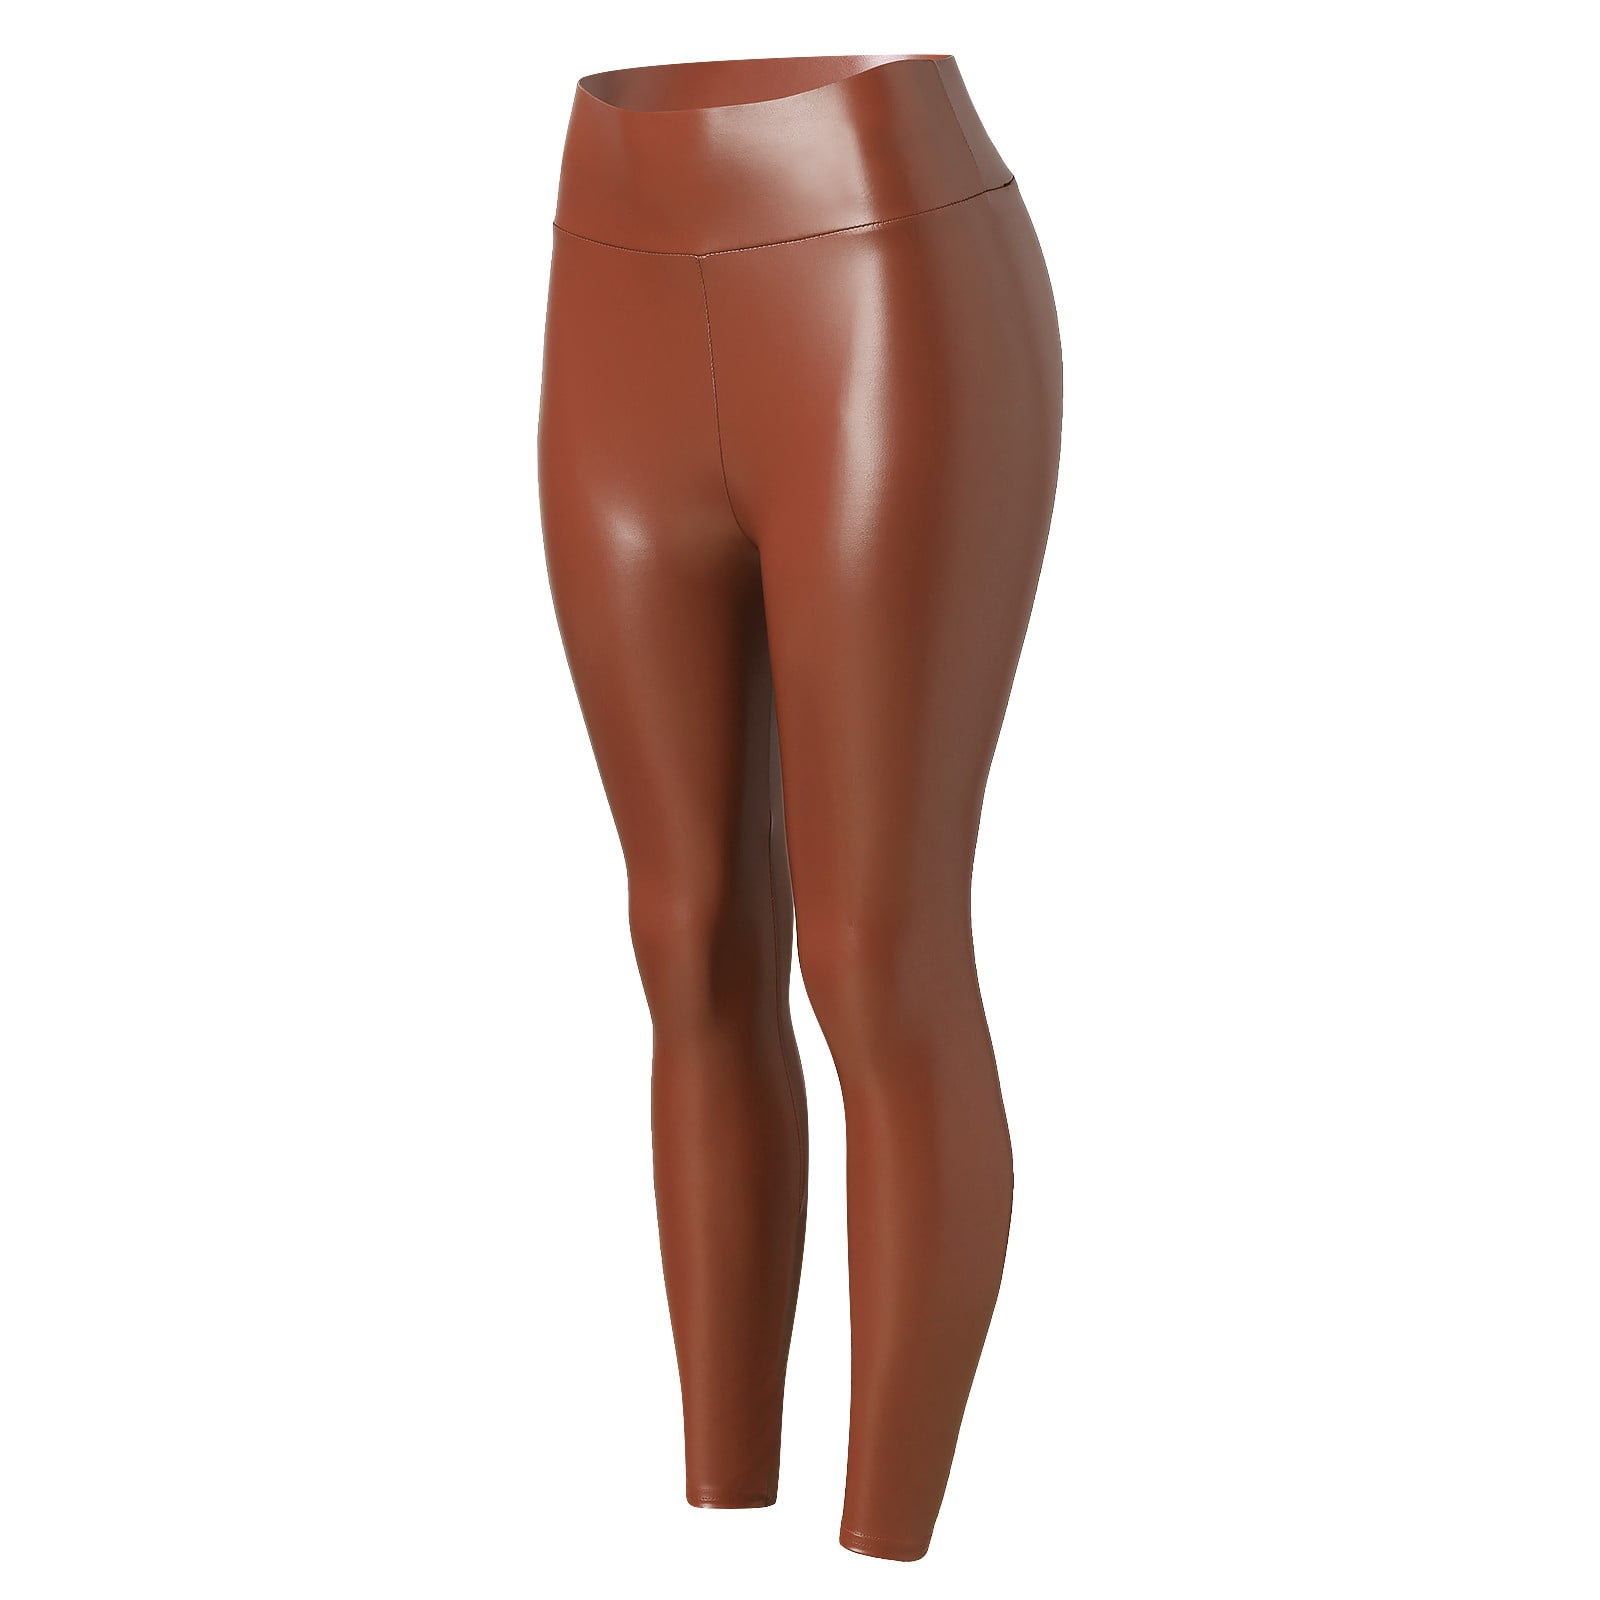 Leather Pleather Waisted Stretch High Leggings Womens Faux Pants